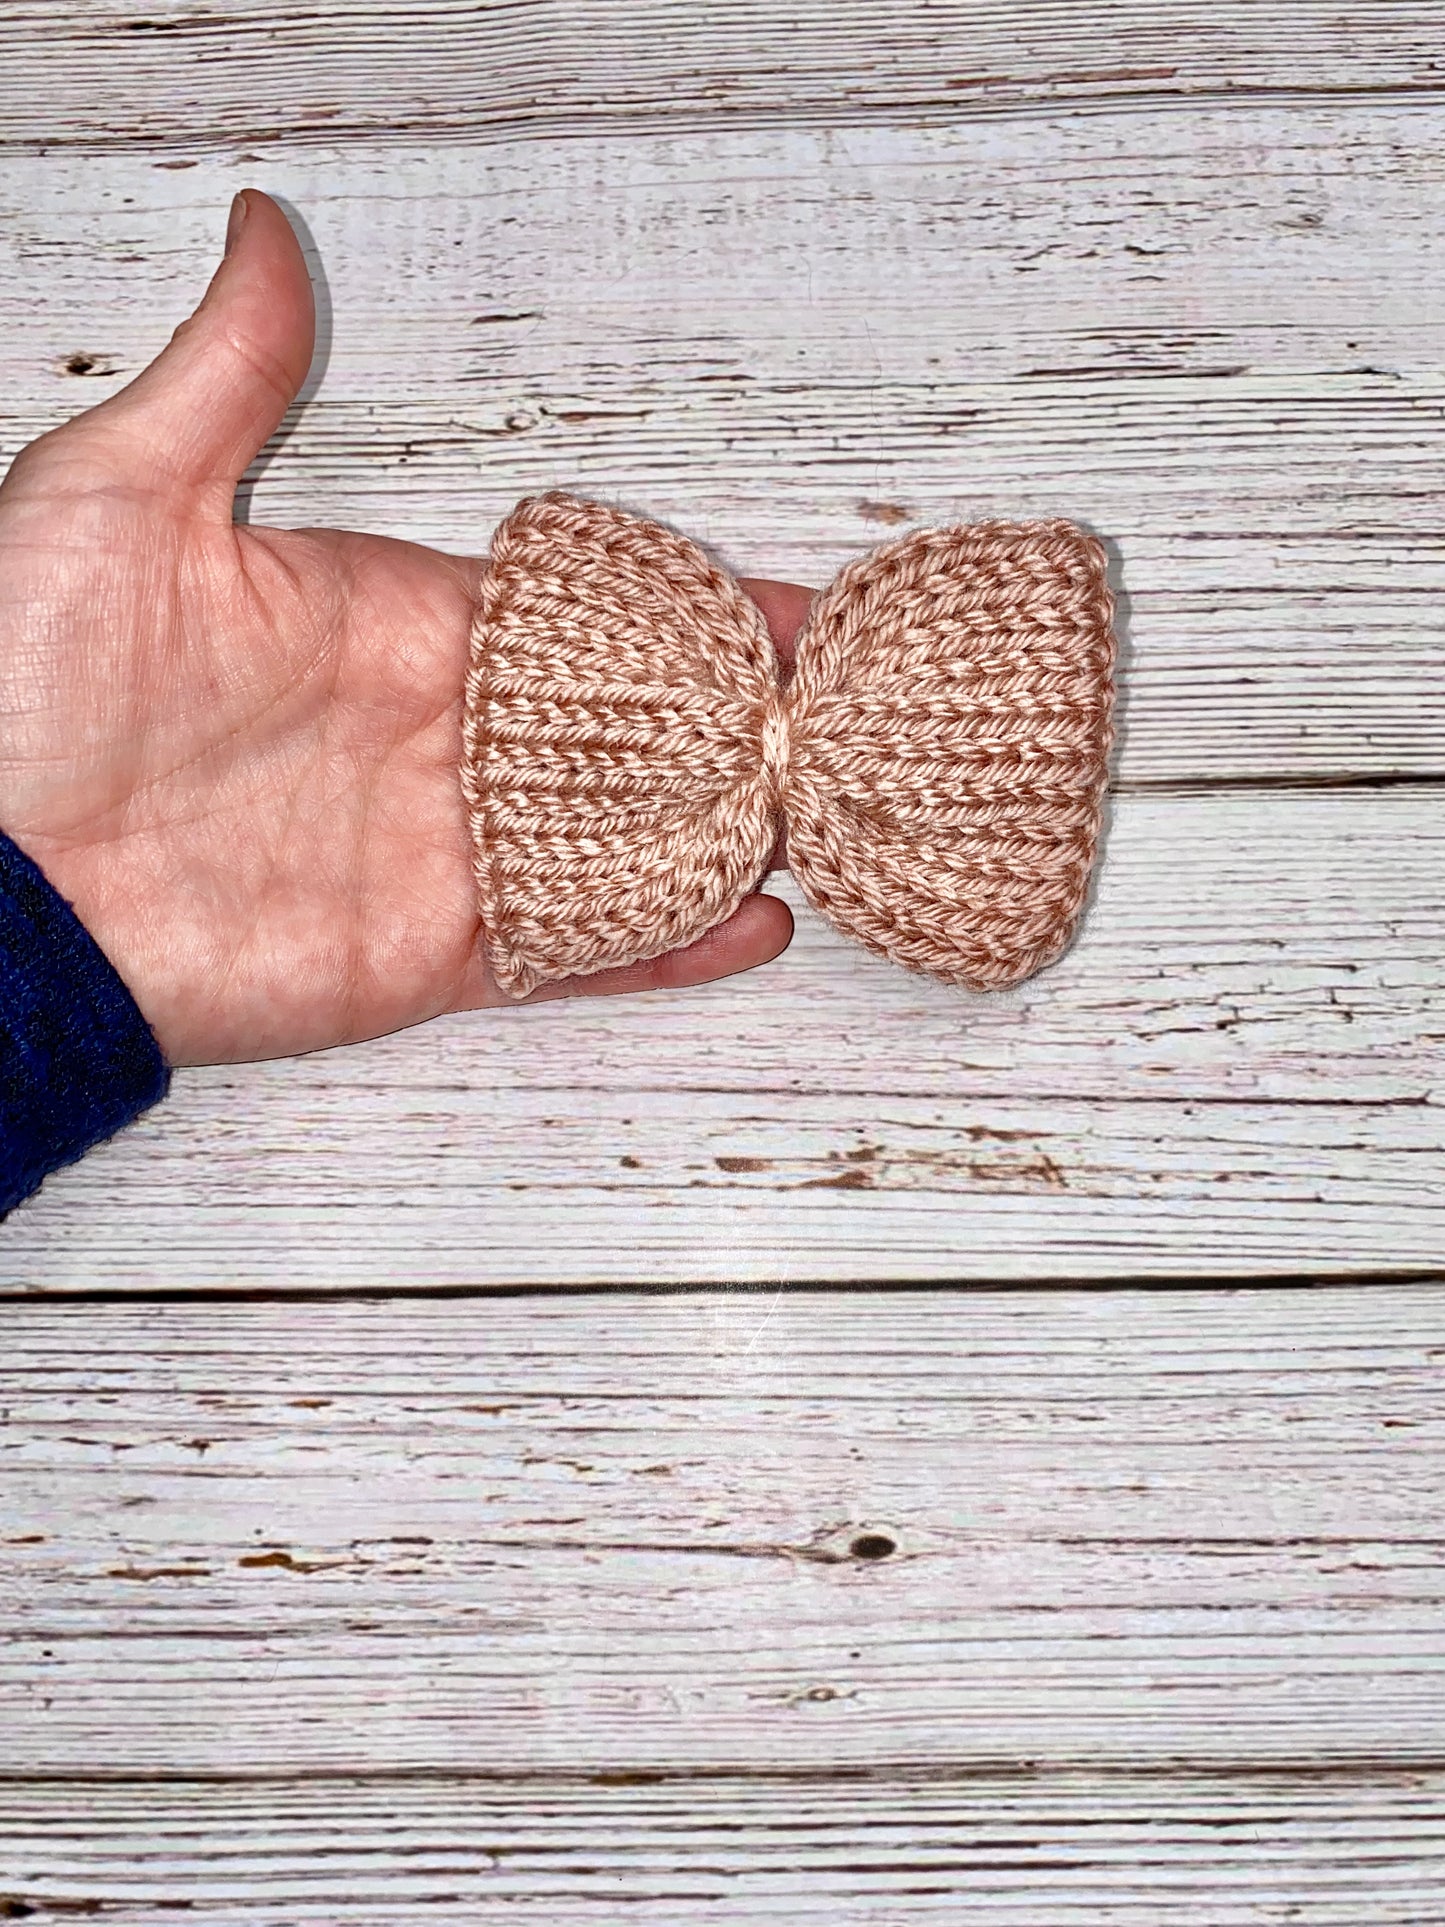 Handmade Knitted Hair Bow Headbands | Trendy and Cute Accessories for Babies and Girls